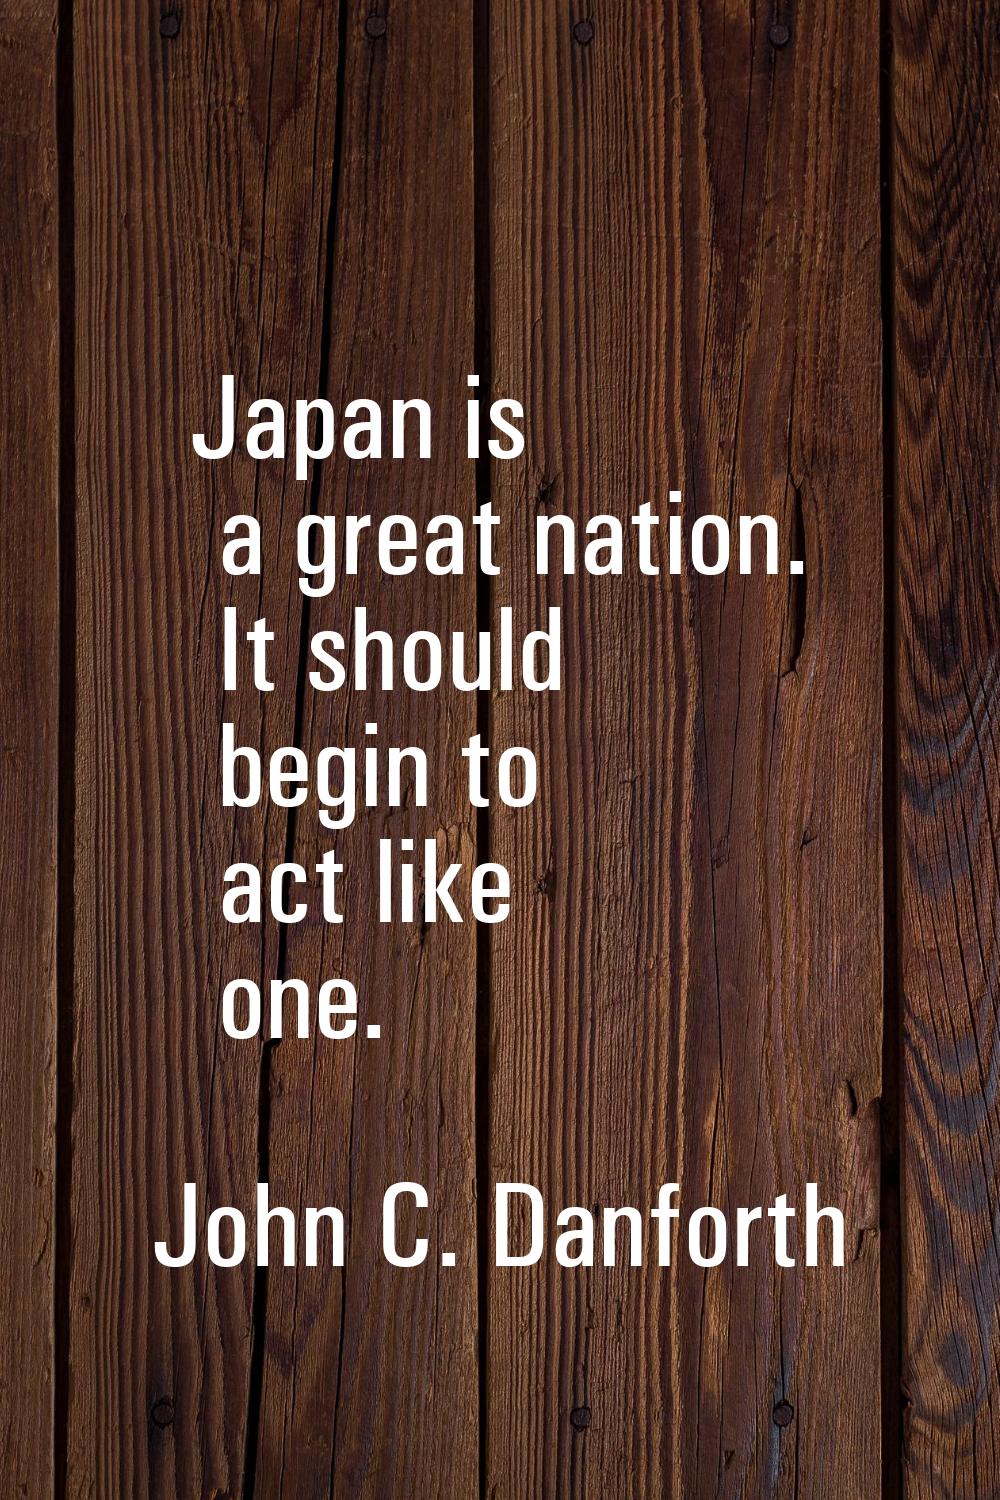 Japan is a great nation. It should begin to act like one.